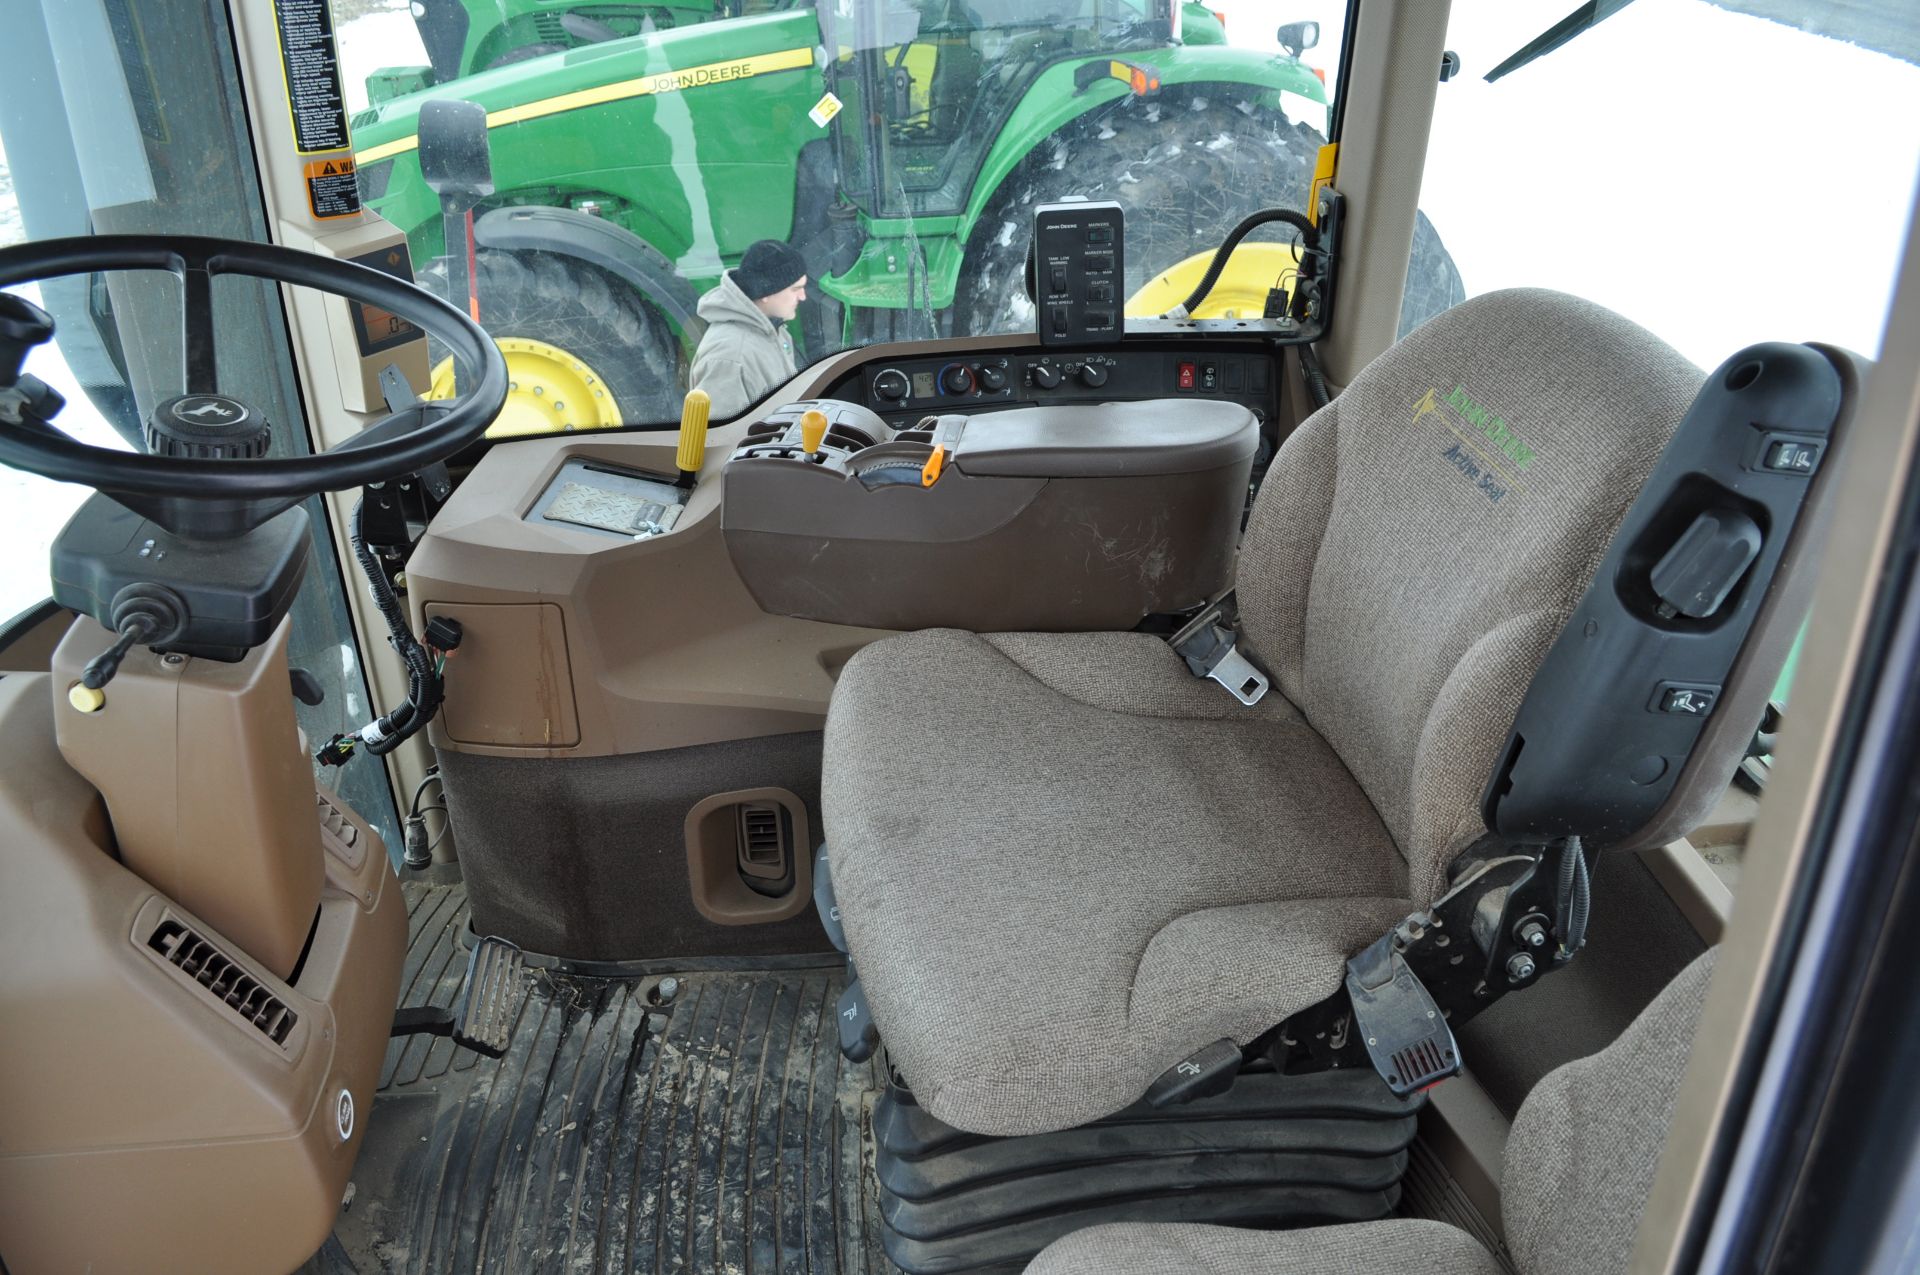 John Deere 9220 tractor, 4WD, 520/85R42 duals, power shift, rear wheel wts, 4 hyd remotes, 3pt, - Image 24 of 35